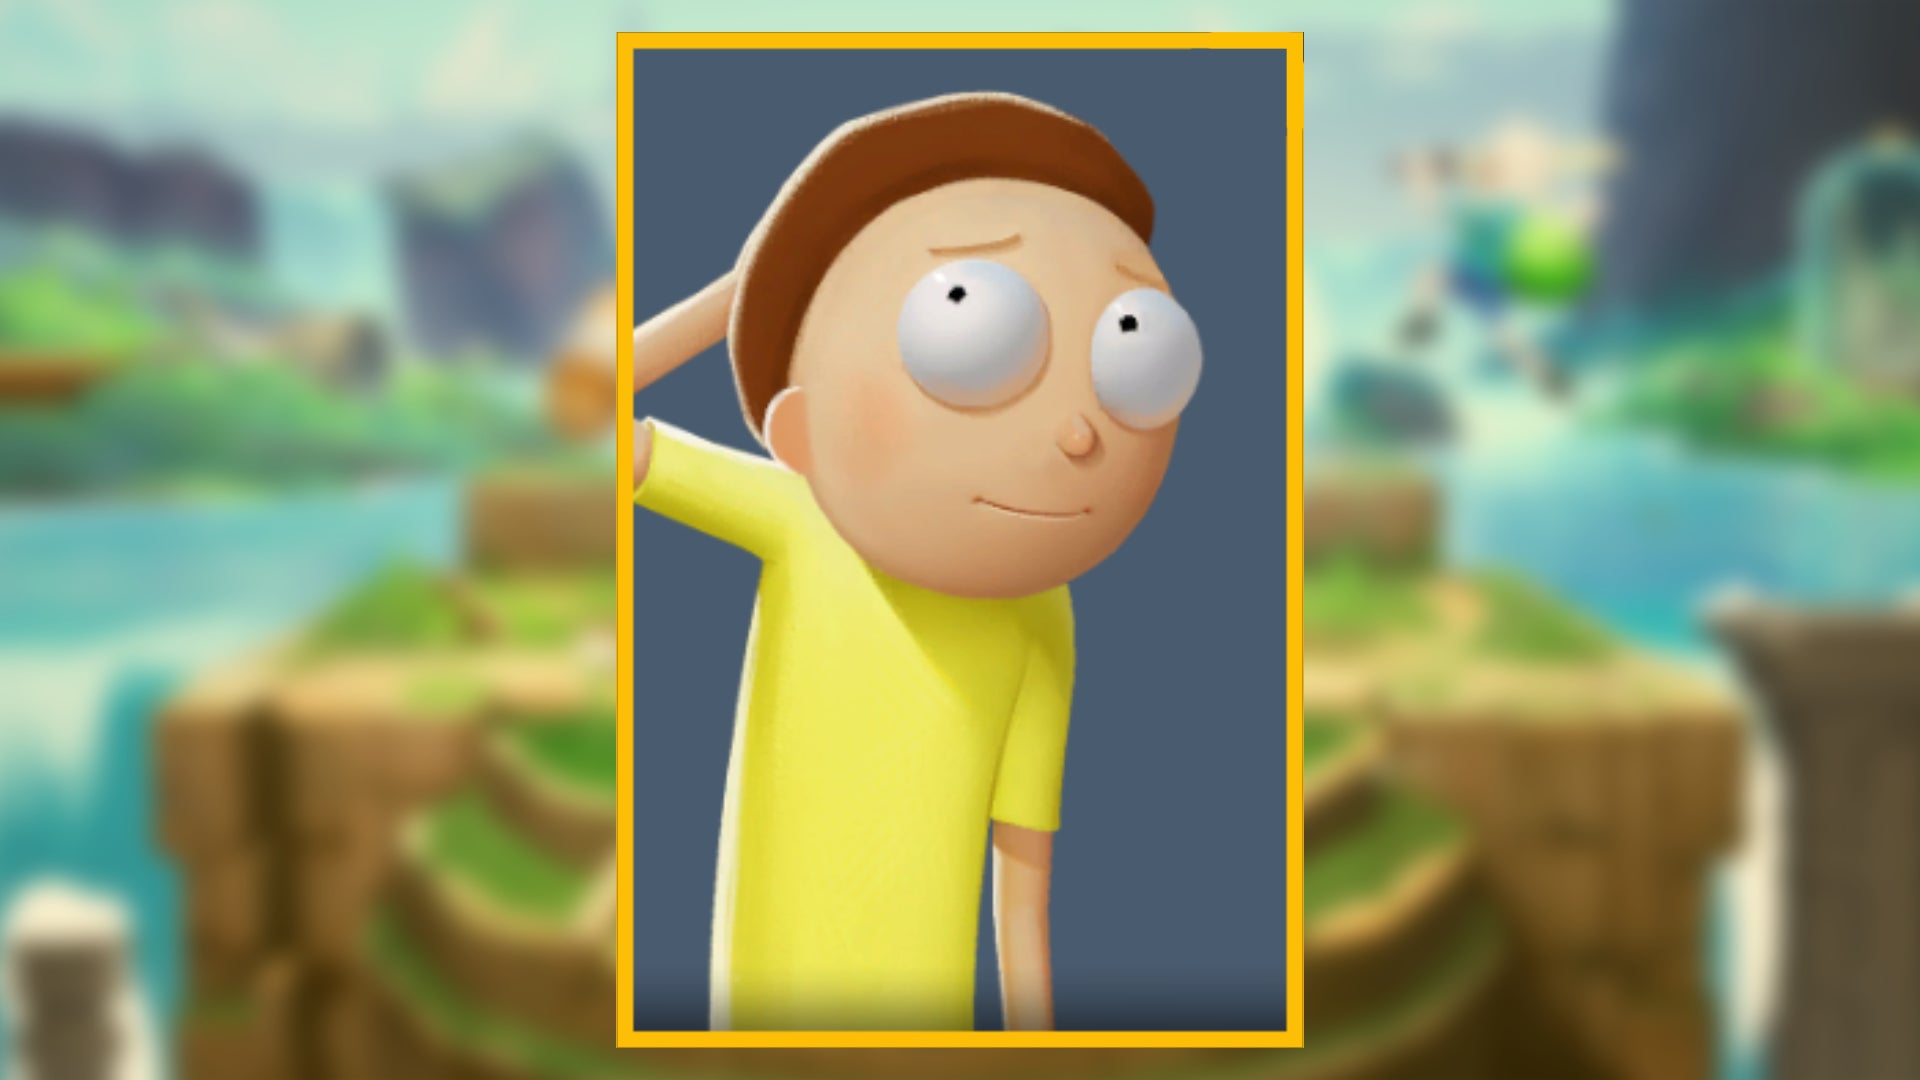 The character portrait of Morty, a playable character in MultiVersus, against a blurred background.